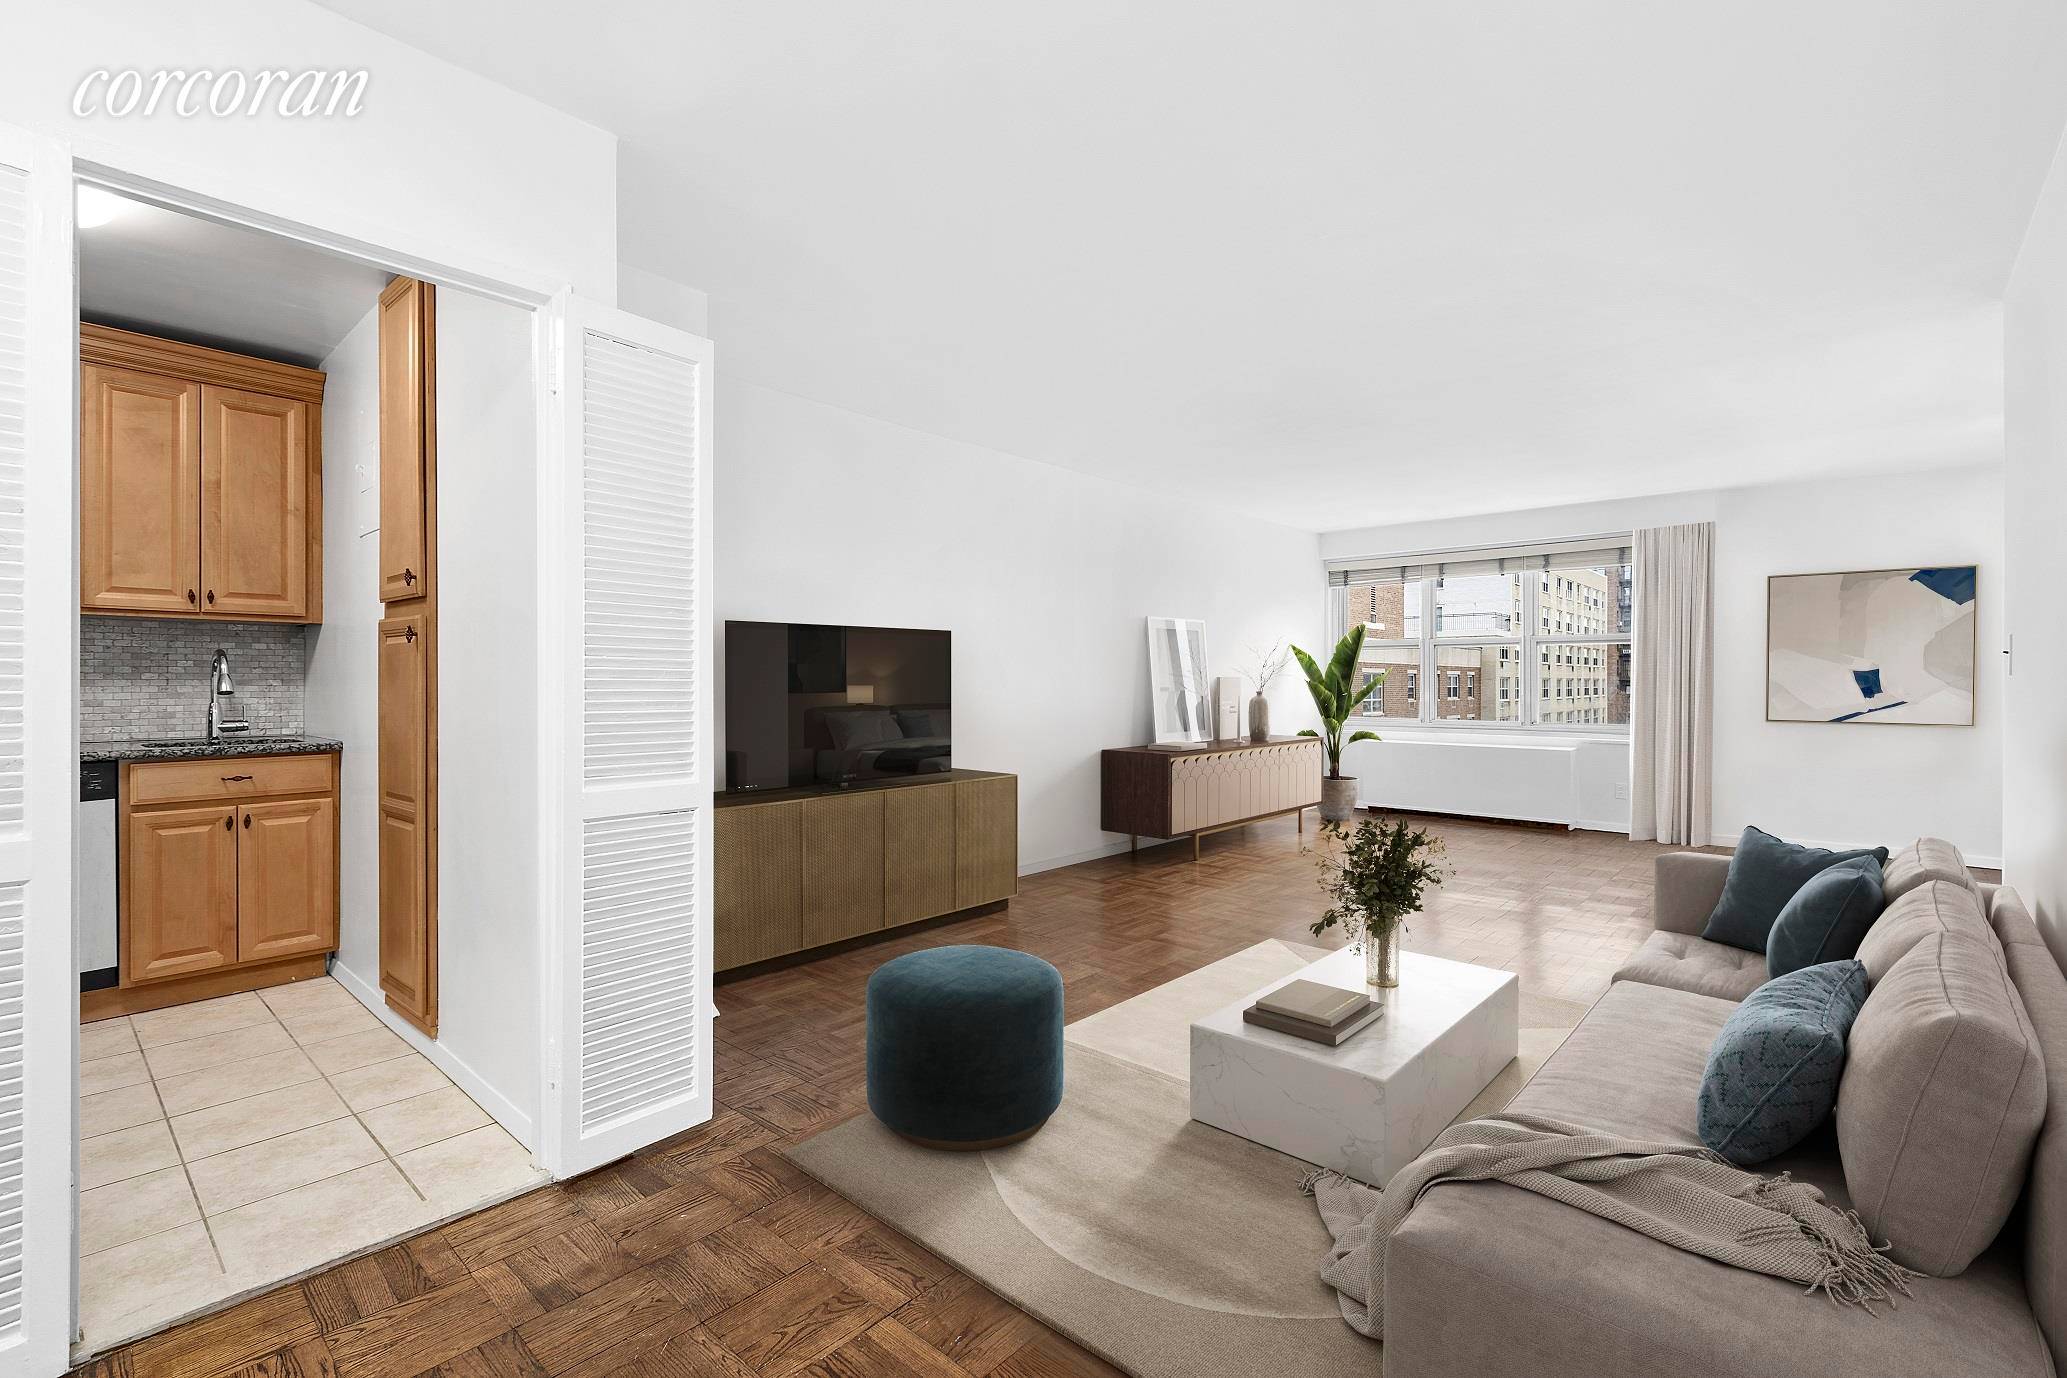 This sunny alcove studio is set in one of Gramercy's most prestigious luxury buildings, a full service coop with an array of on site amenities.